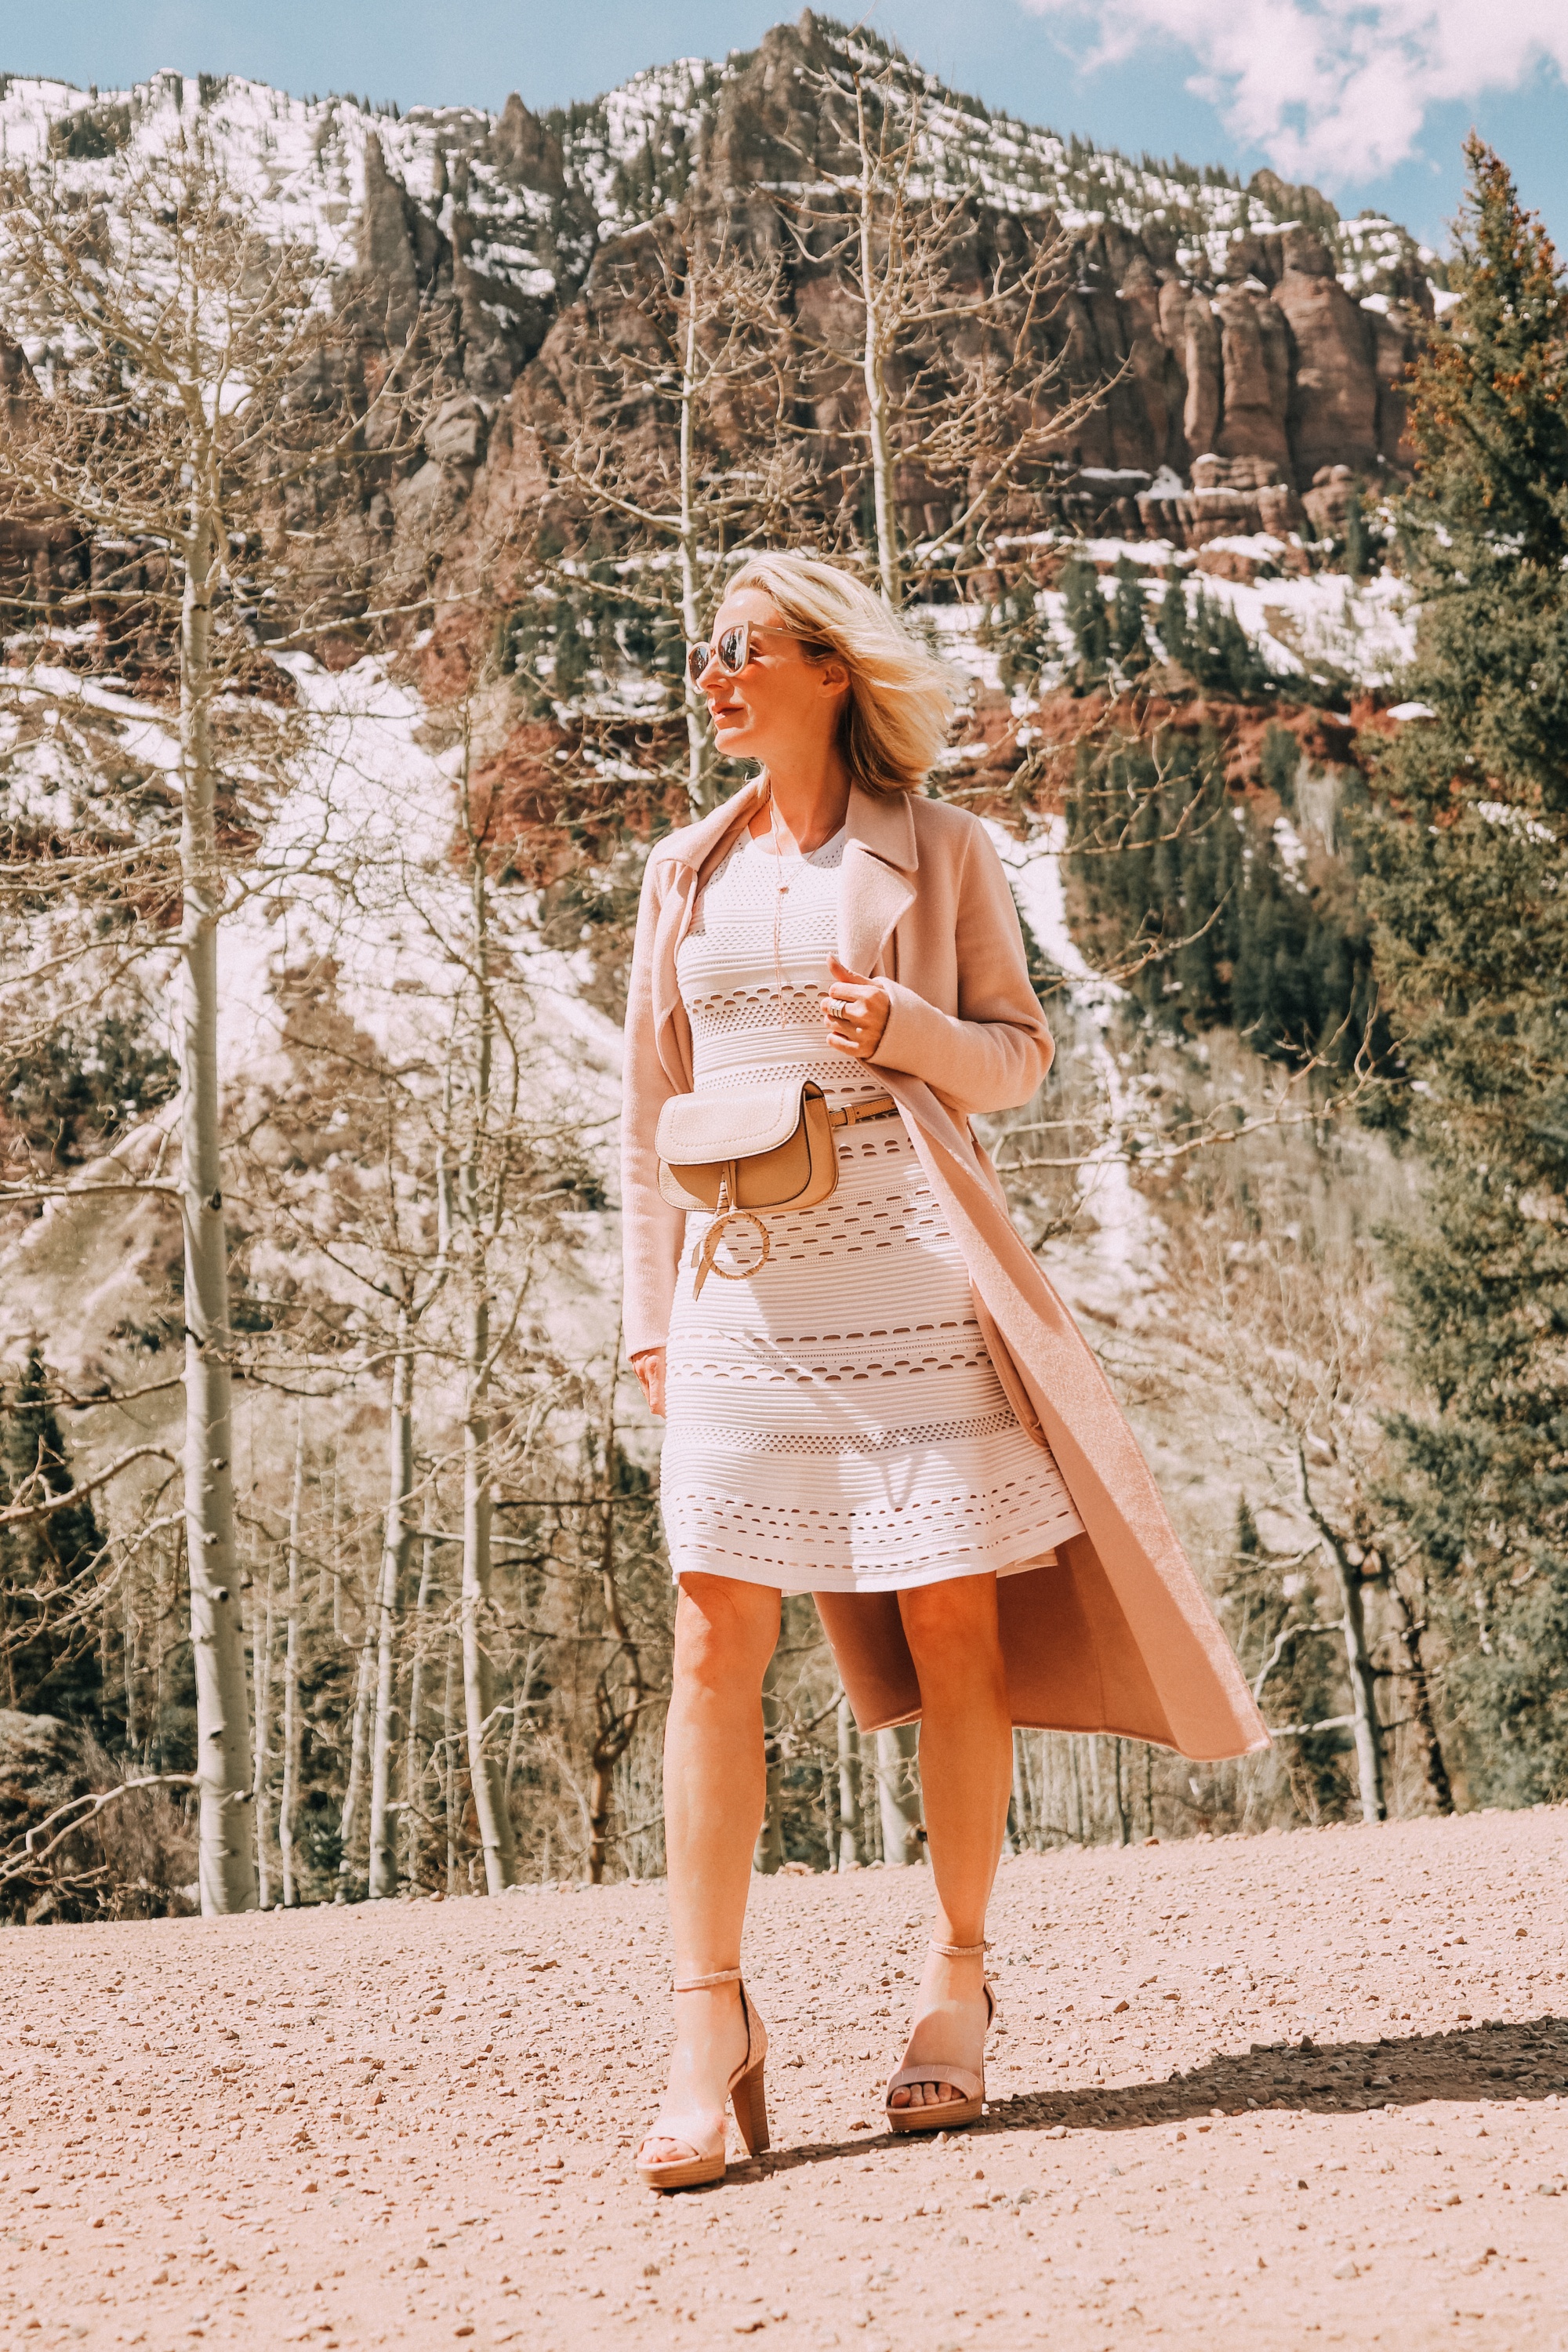 Neutral Accessories, Fashion blogger Erin Busbee of BusbeeStyle.com featuring a beige belt bag, neutral platform sandals, and a lariat necklace by Vince Camuto and wearing a Bailey 44 white dress and blush coat in Telluride, CO